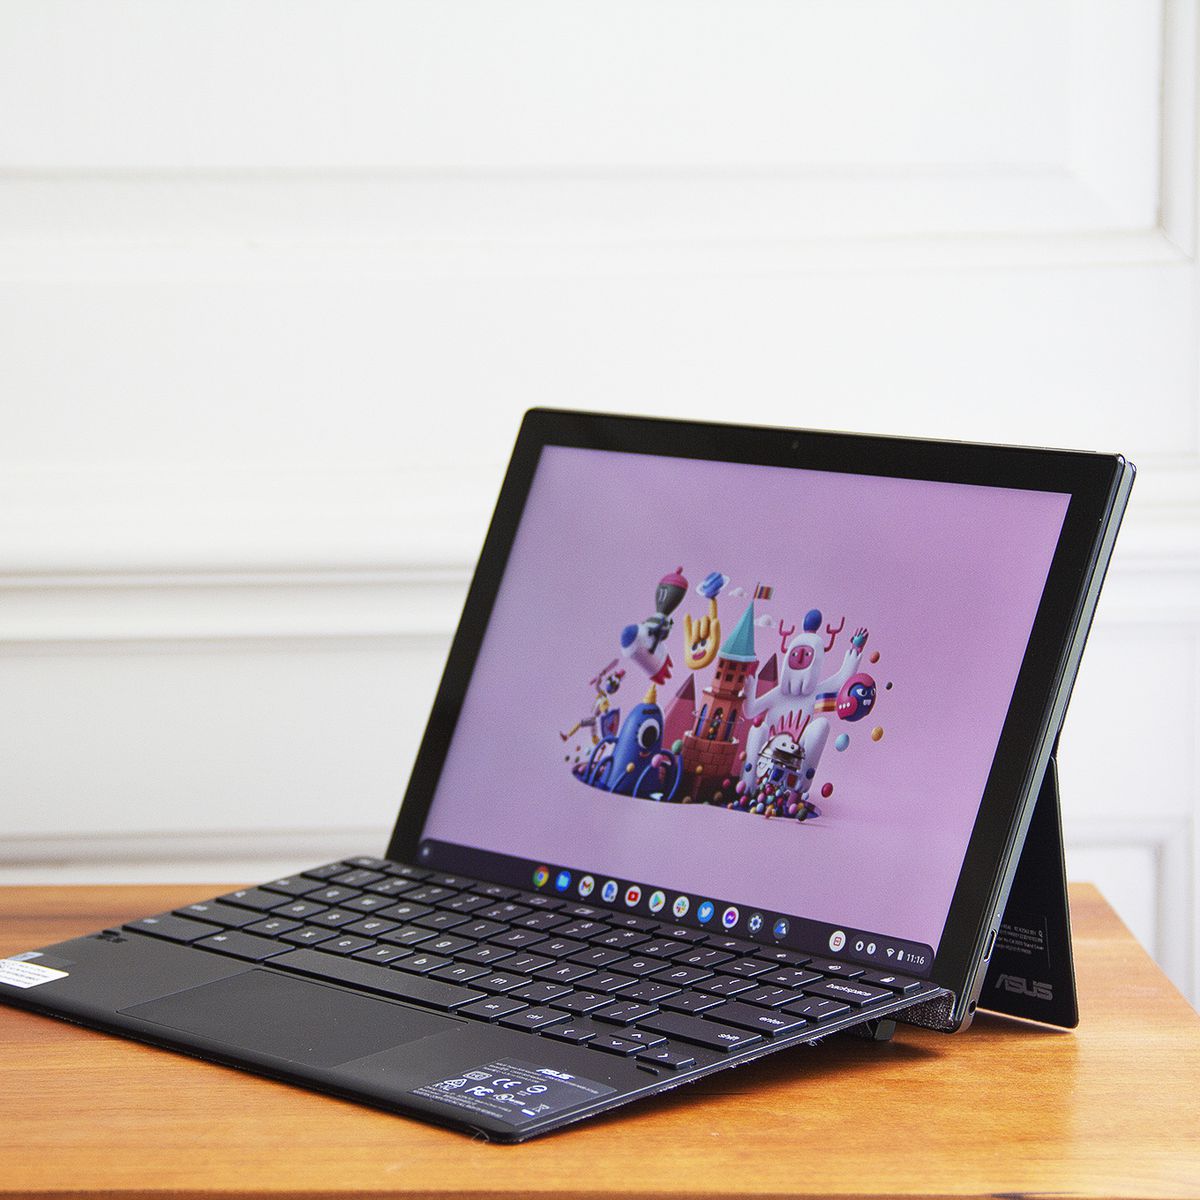 The Asus Chromebook Detachable CM3 open, angled to the left. The screen displays a cartoon city scene on a pink background.